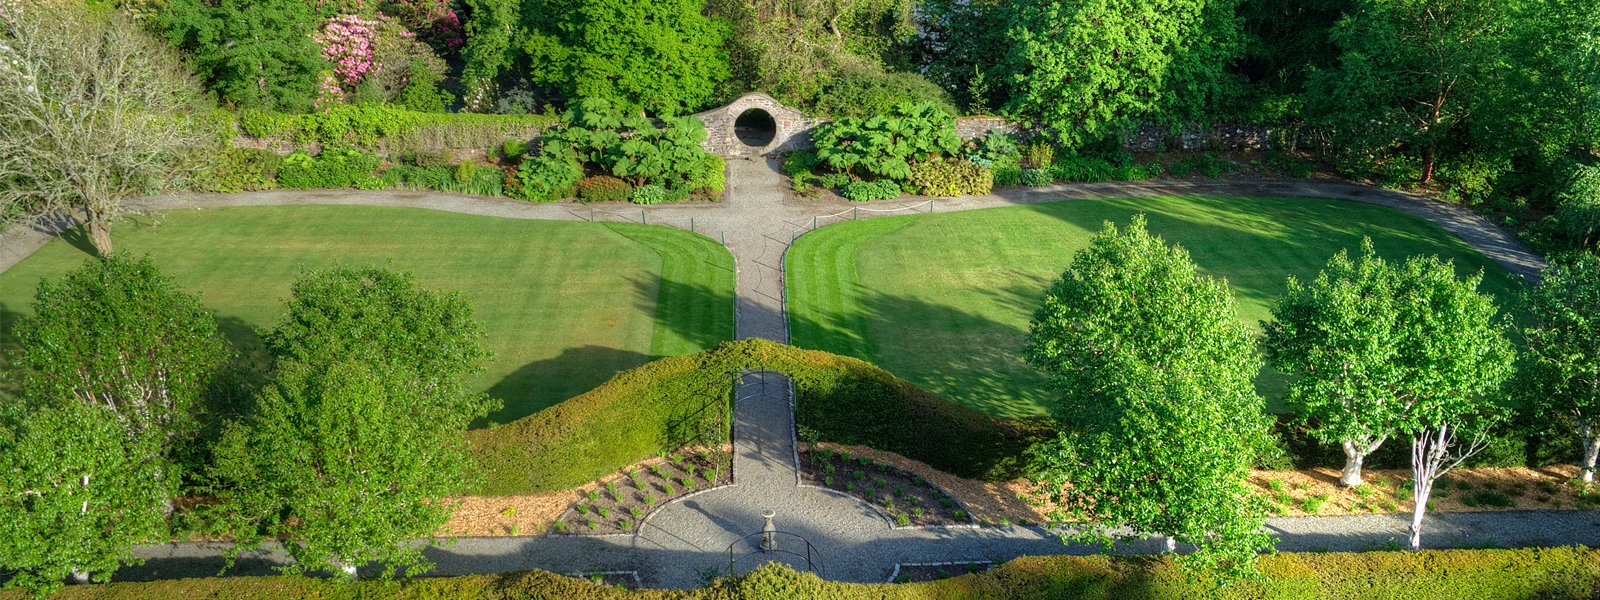 Aerial shot of the moongate in the walled garden at Ross Priory. Image courtesy of Aye in the Sky Aerial Photography